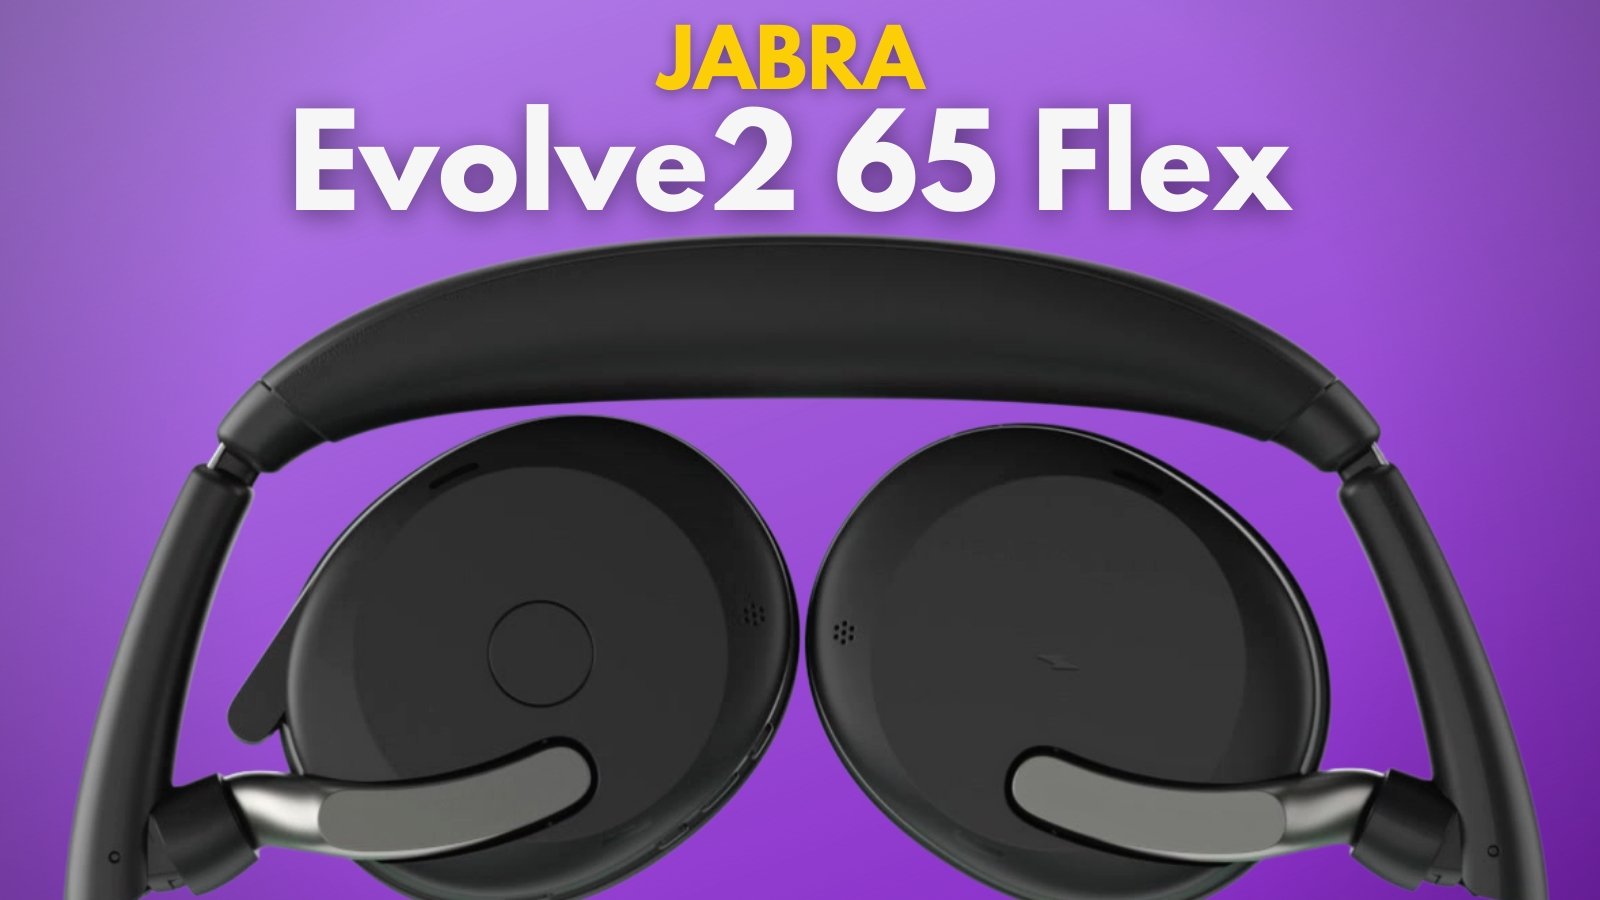 The Ultimate Headset Remote, and Jabra Evolve2 65